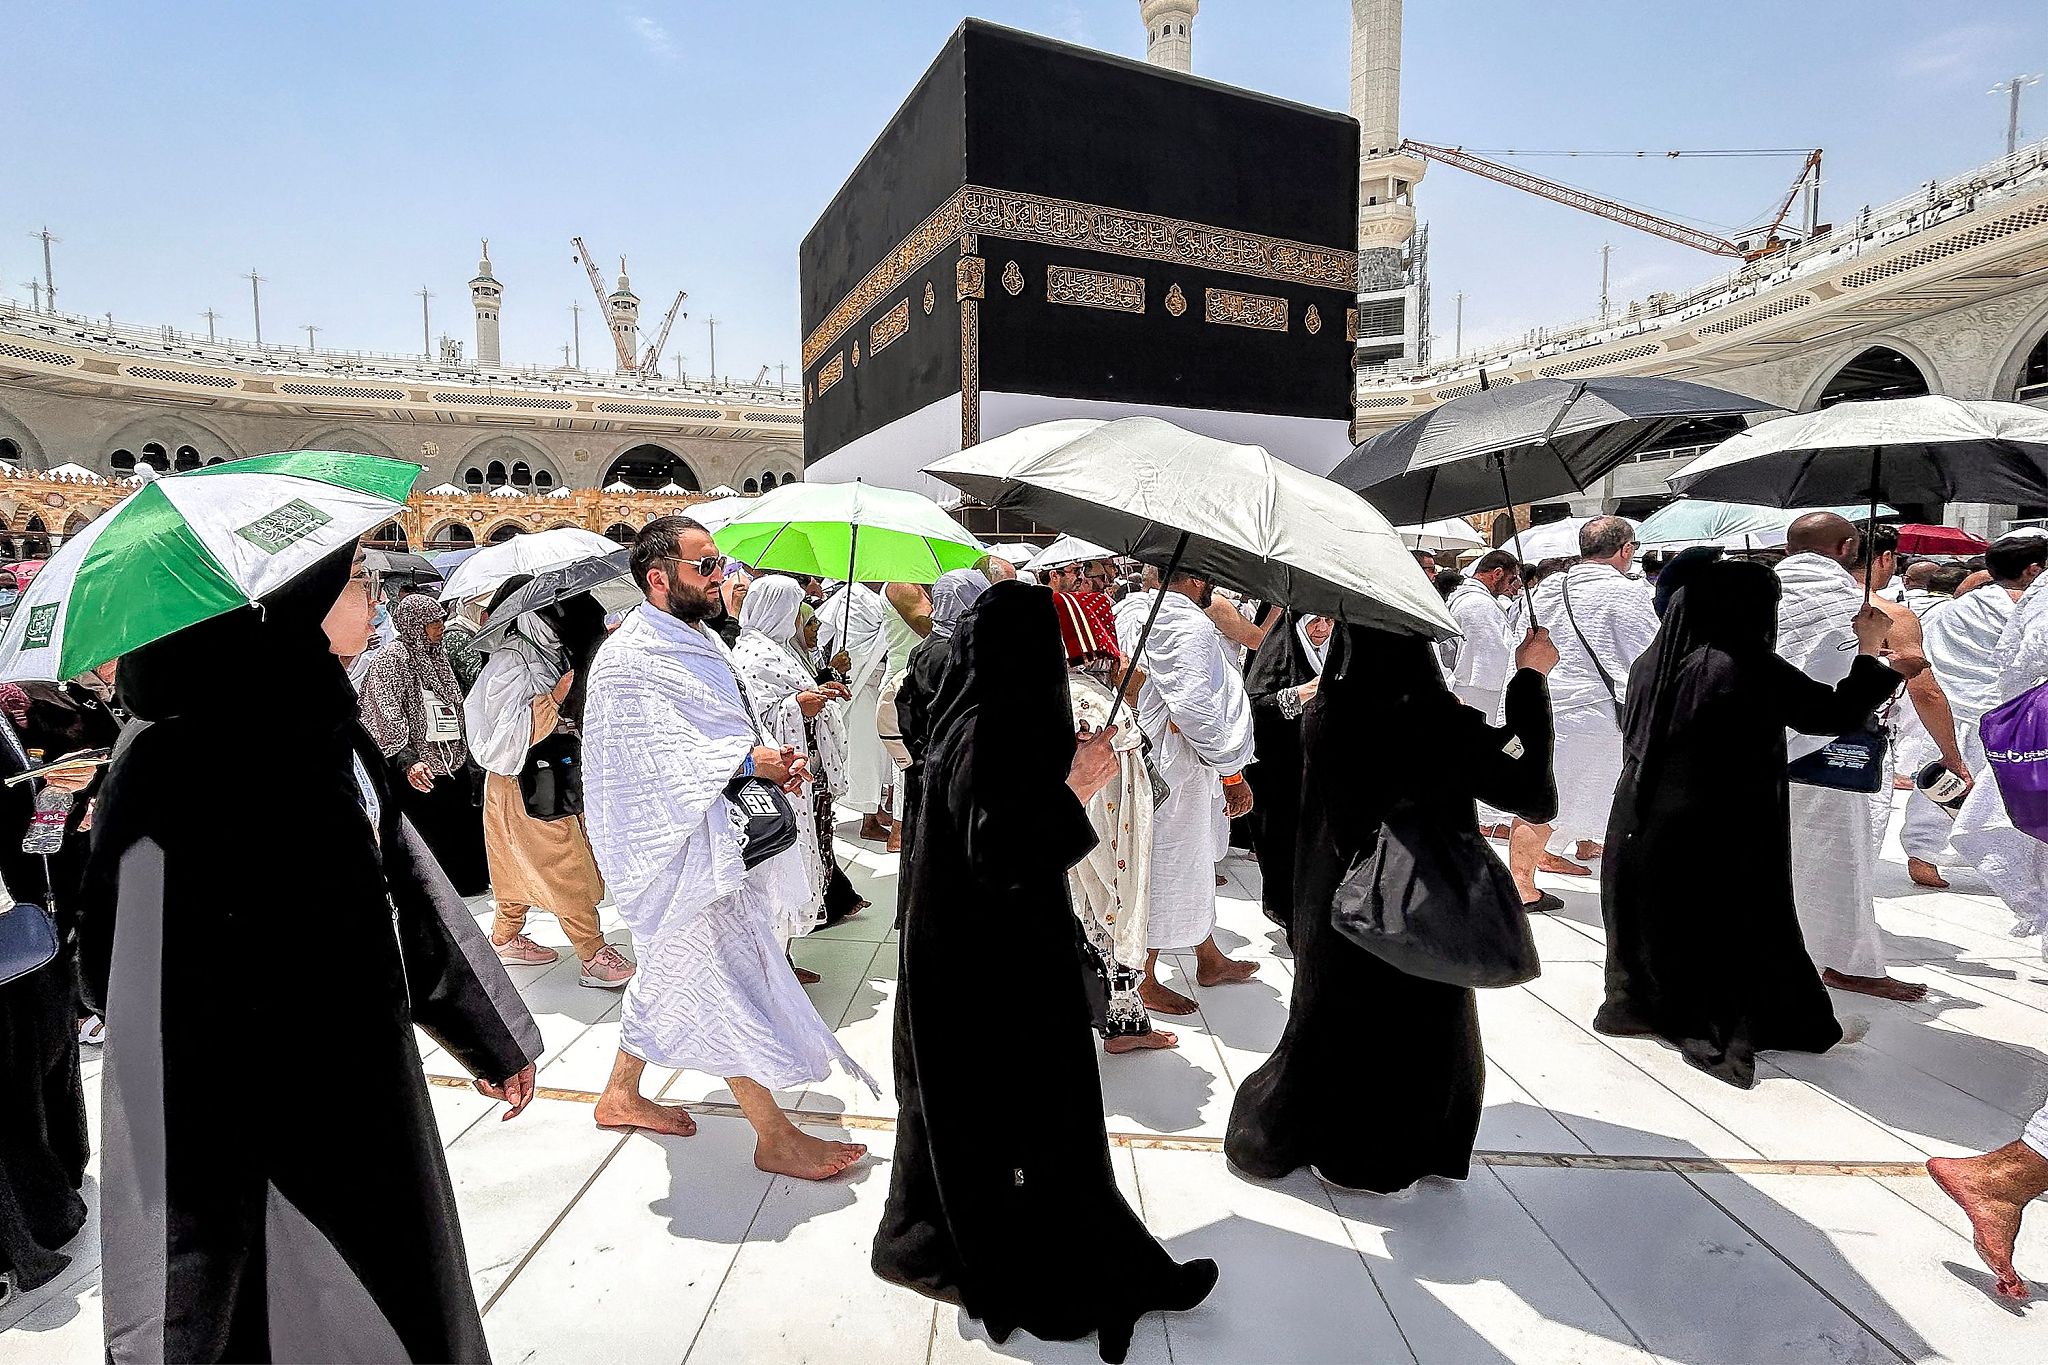 Devotees hold umbrellas to shield them from scorching heat as they walk around the Kaaba, Islam's holiest shrine, at the Grand Mosque in Saudi Arabia's holy city of Mecca, June 14, 2024. /CFP